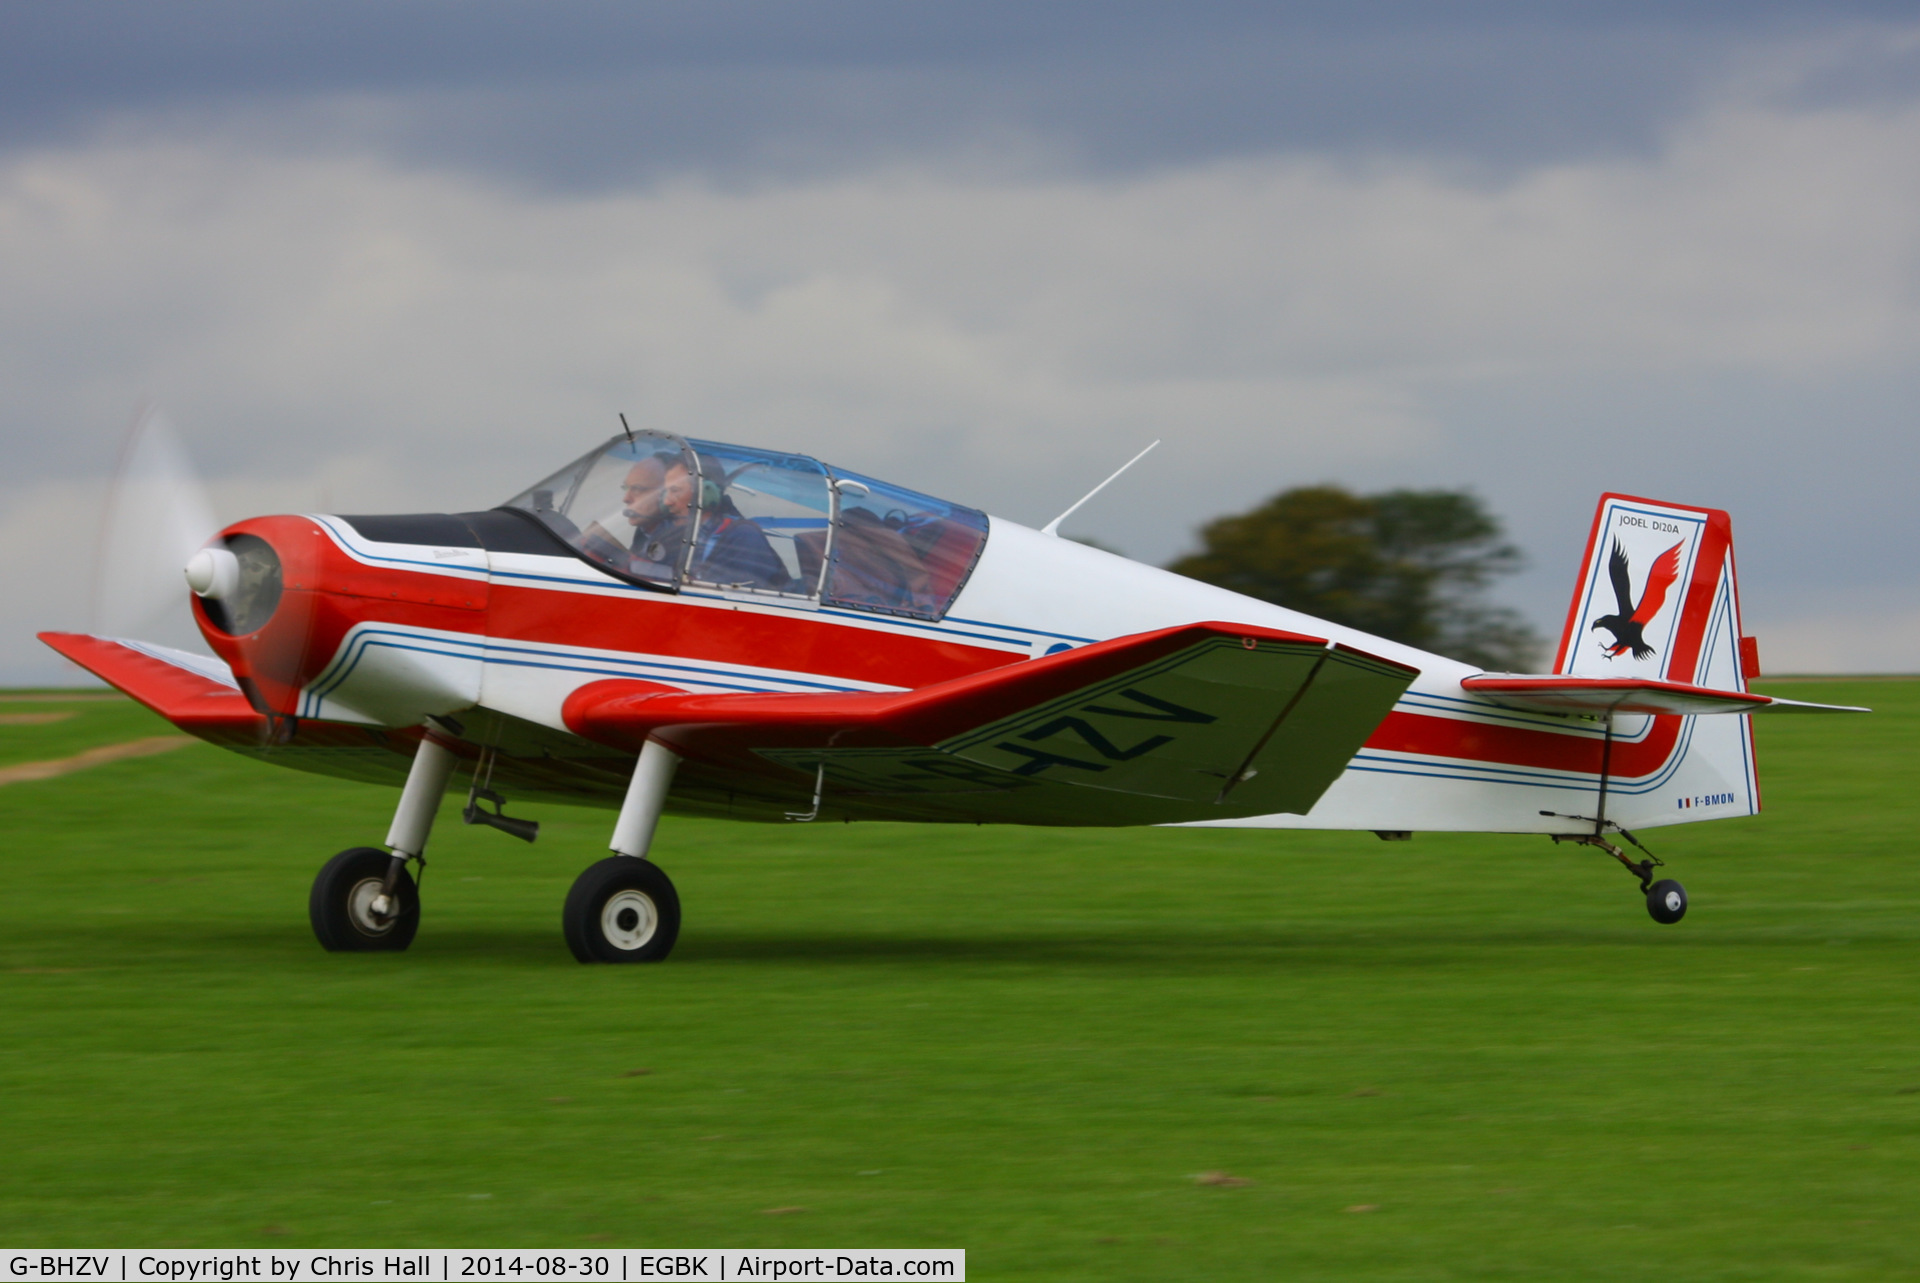 G-BHZV, 1965 Jodel D-120A C/N 278, at the LAA Rally 2014, Sywell